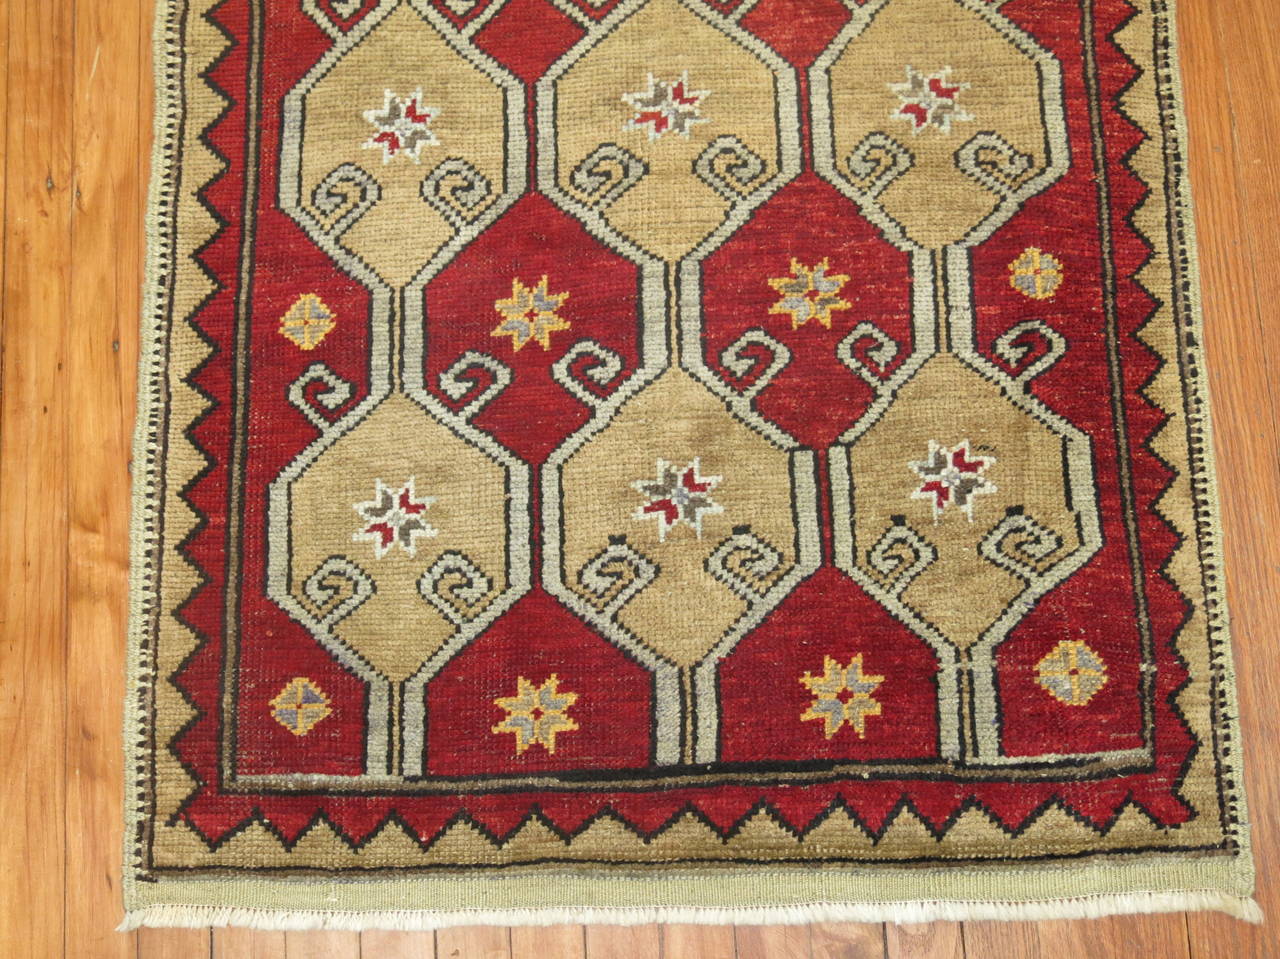 Vintage Turkish rug with all-over camel motif on a crimson red background,

circa mid-20th century, measures: 2'10